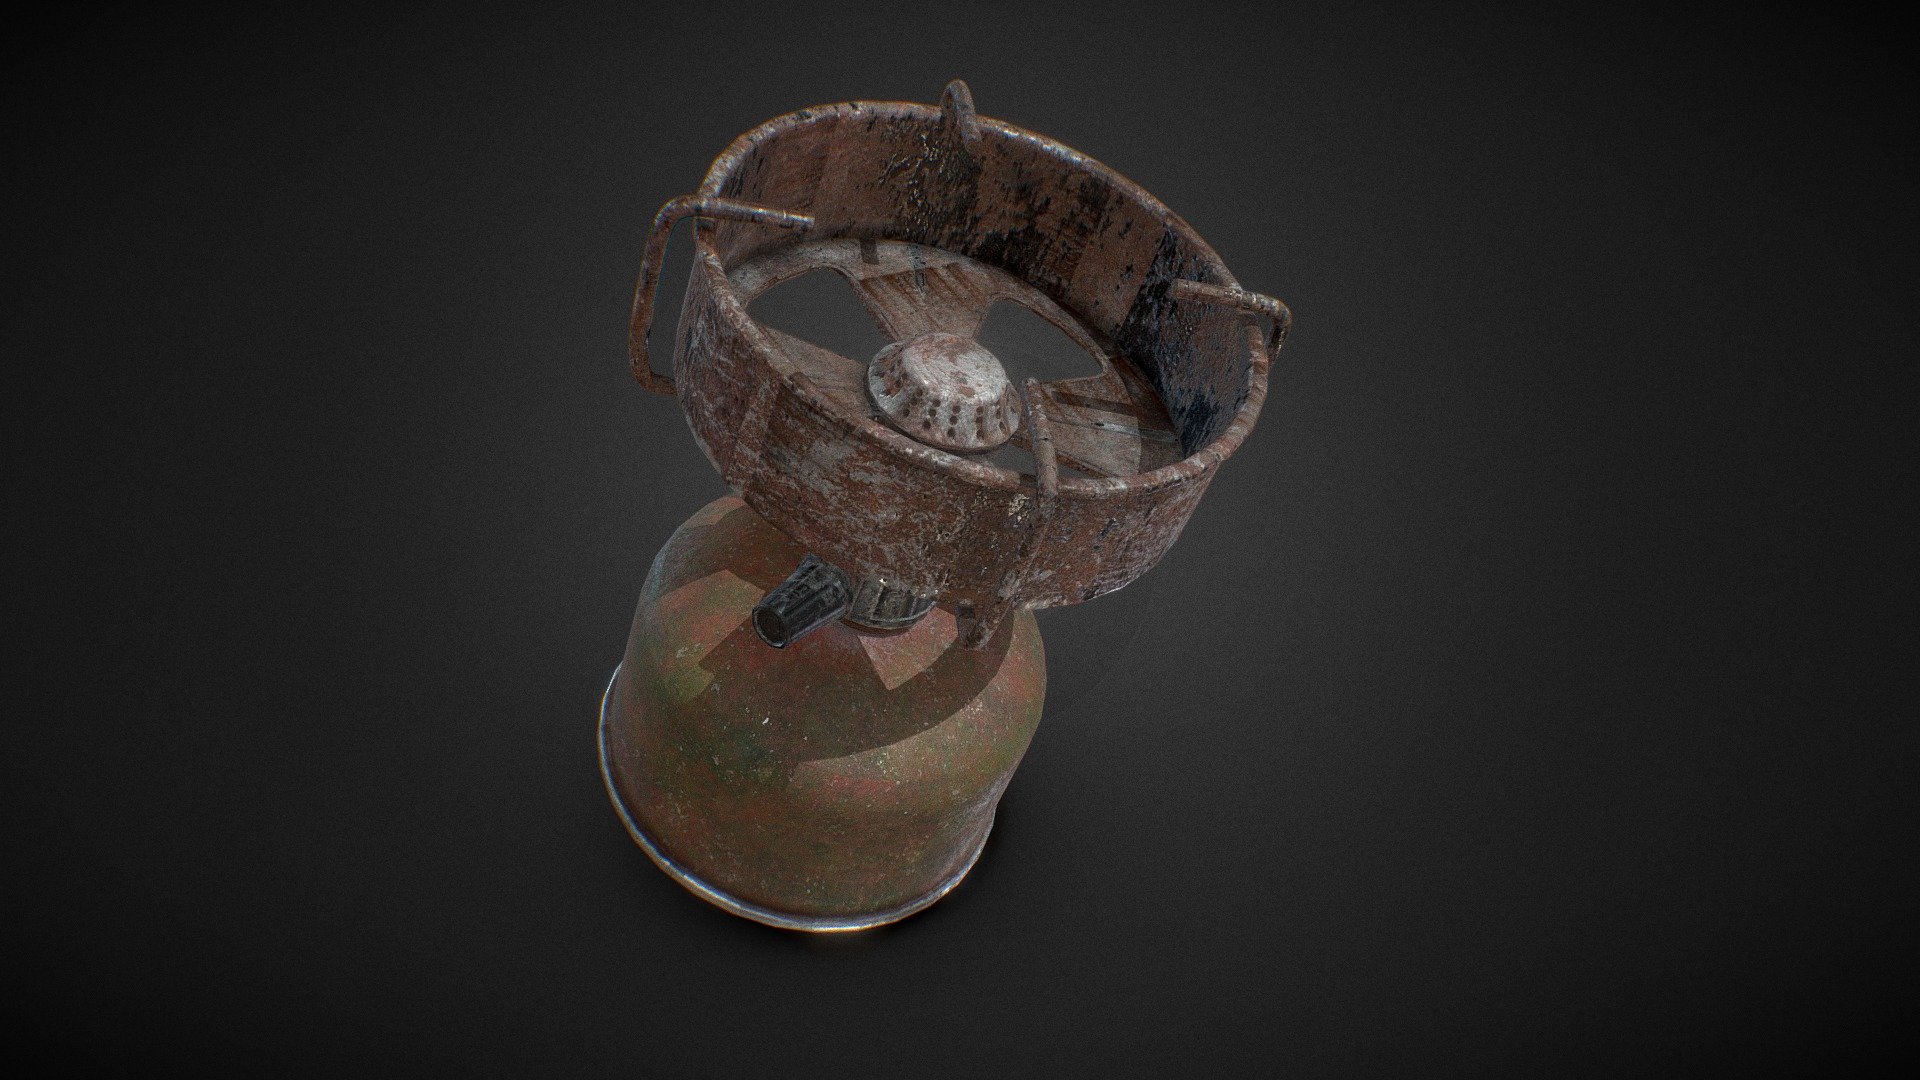 An old lit portable camping stove and gas canister I made in blender, using the High poly / Low Poly workflow. I later textured it in Substance painter :)

The model was based off from this image:
https://c8.alamy.com/comp/B0B4TF/an-old-lit-portable-camping-stove-and-gas-canister-B0B4TF.jpg - Portable Gas Camping Stove - Download Free 3D model by GameDev Nick (@GameDevNick) 3d model